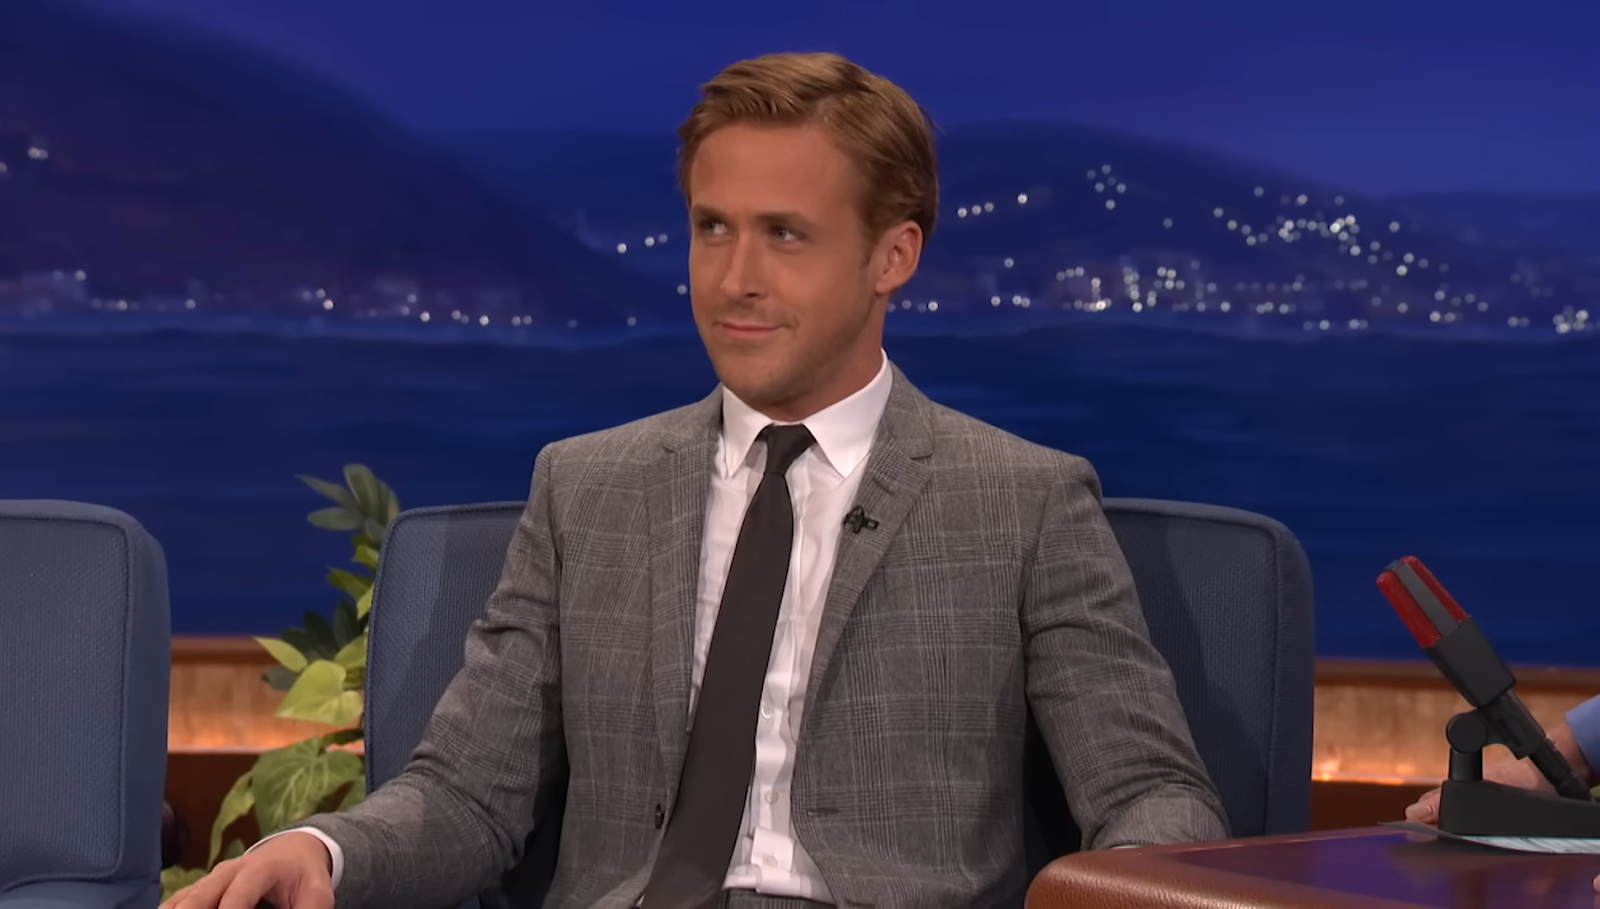 Ryan Gosling in a gray classic suit and tie sitting in a chair in front of the city view behind him